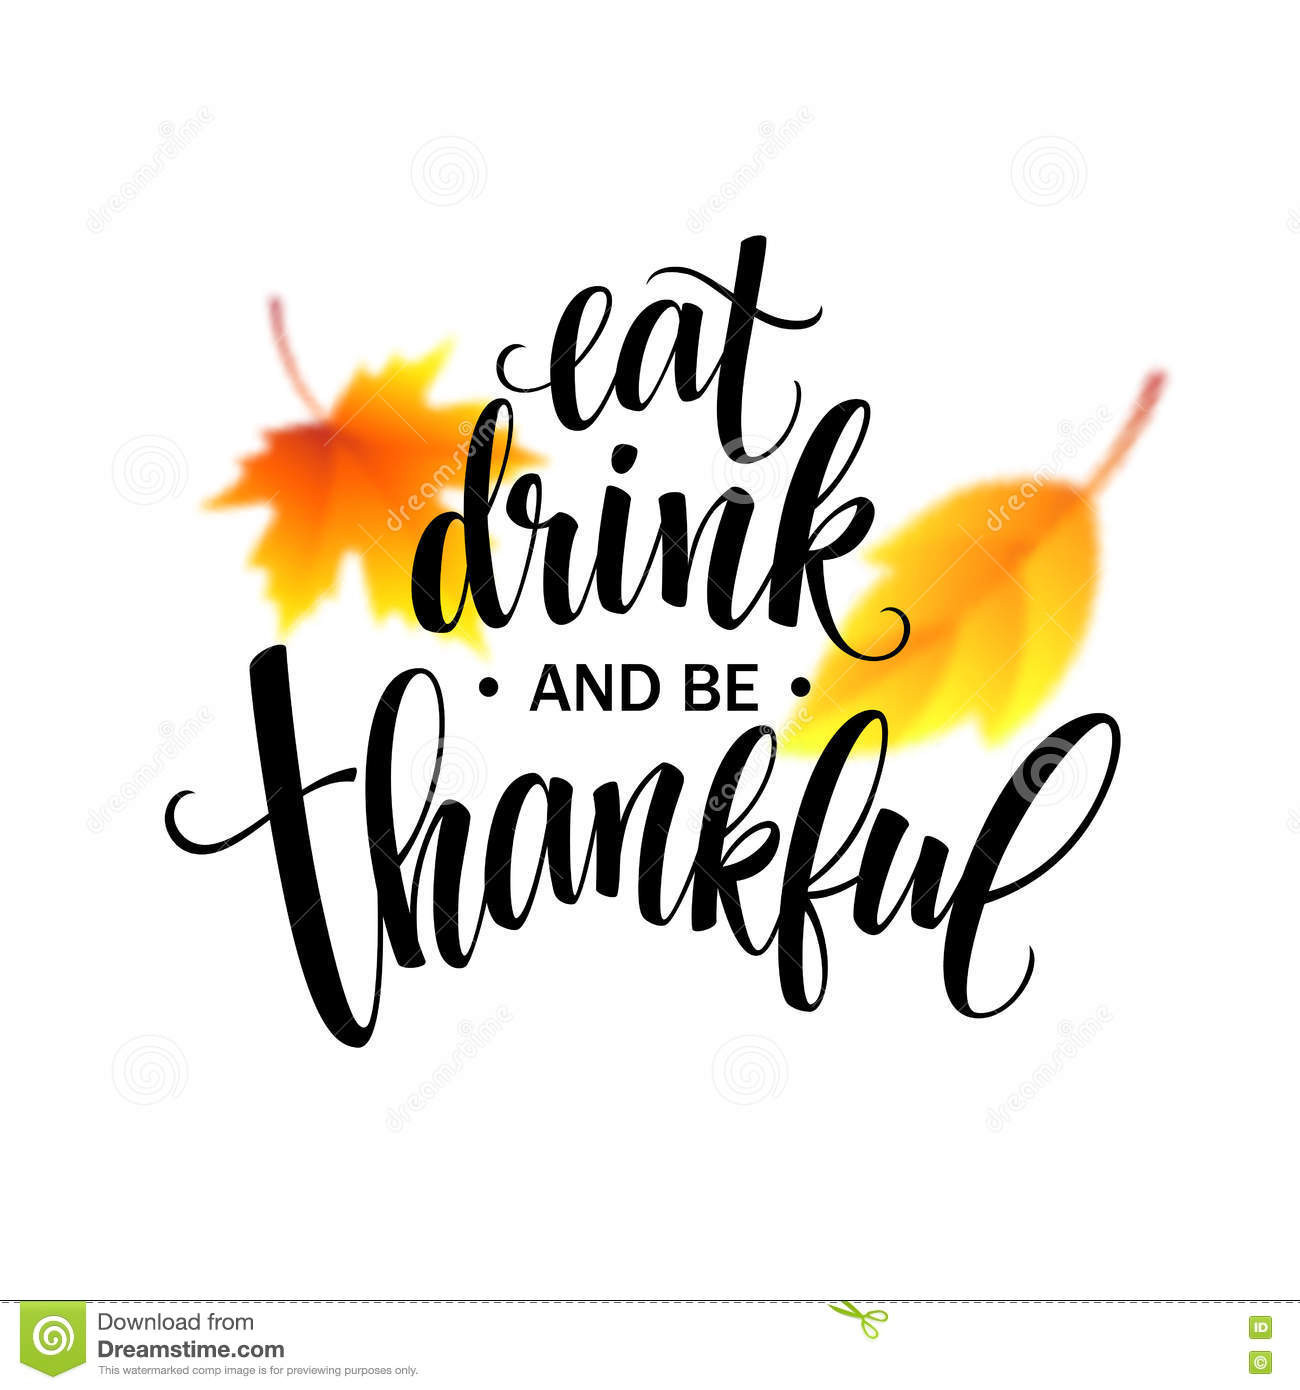 Thanksgiving Quotes Calligraphy
 Eat Drink And Be Thankful Hand Drawn Inscription